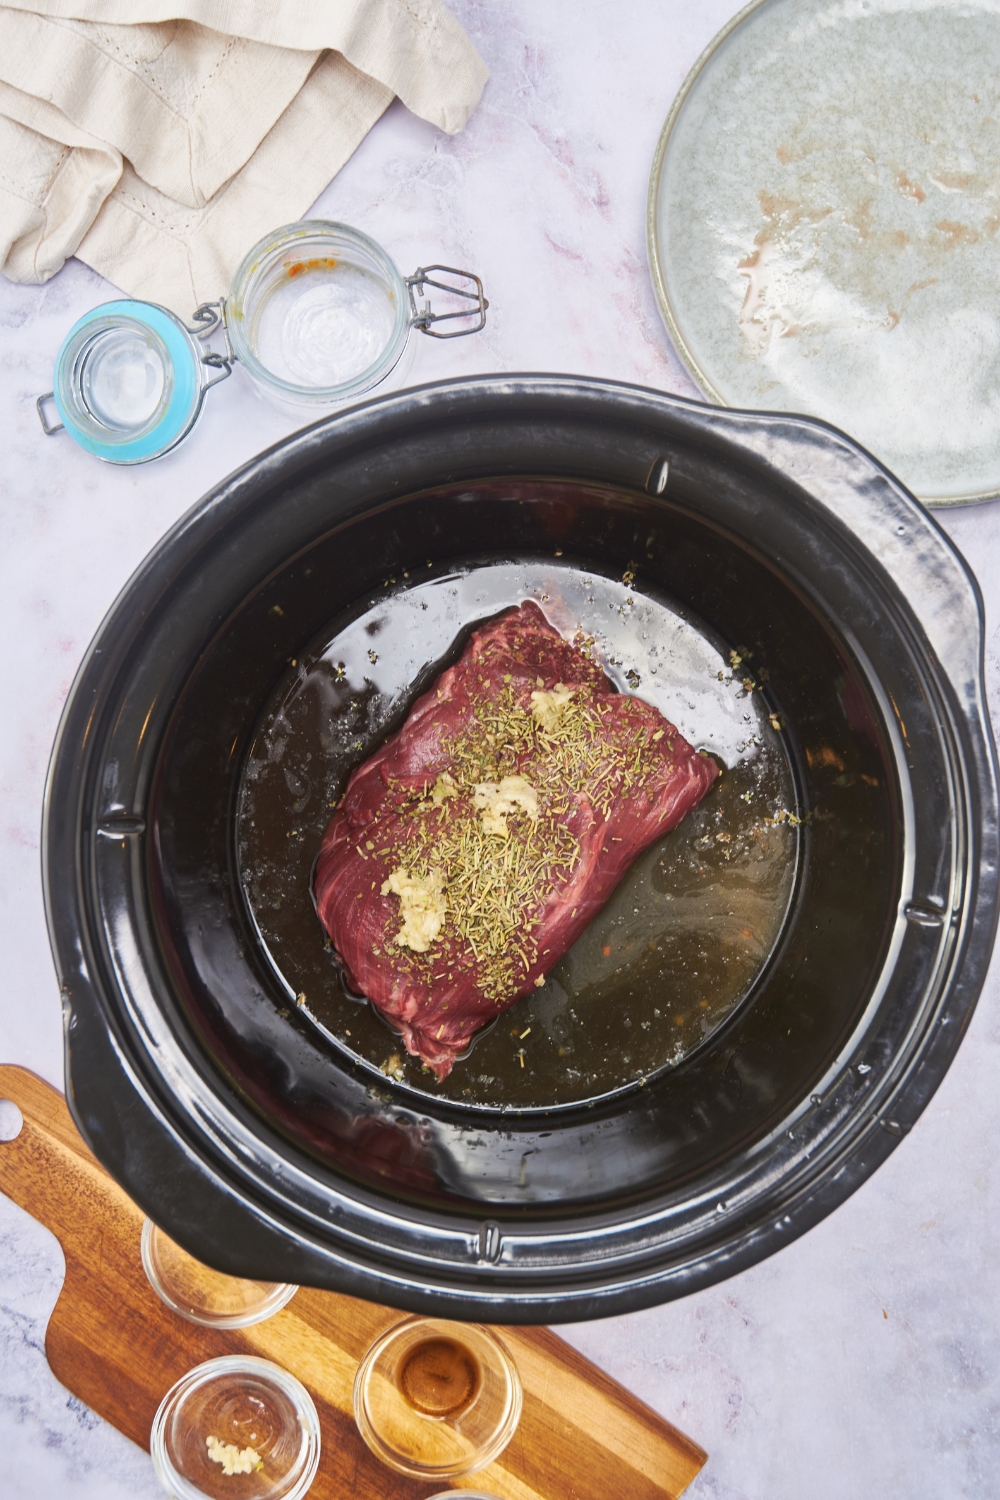 A raw beef roast in a black crock pot topped with minced garlic, dried herbs, and broth poured around the beef.